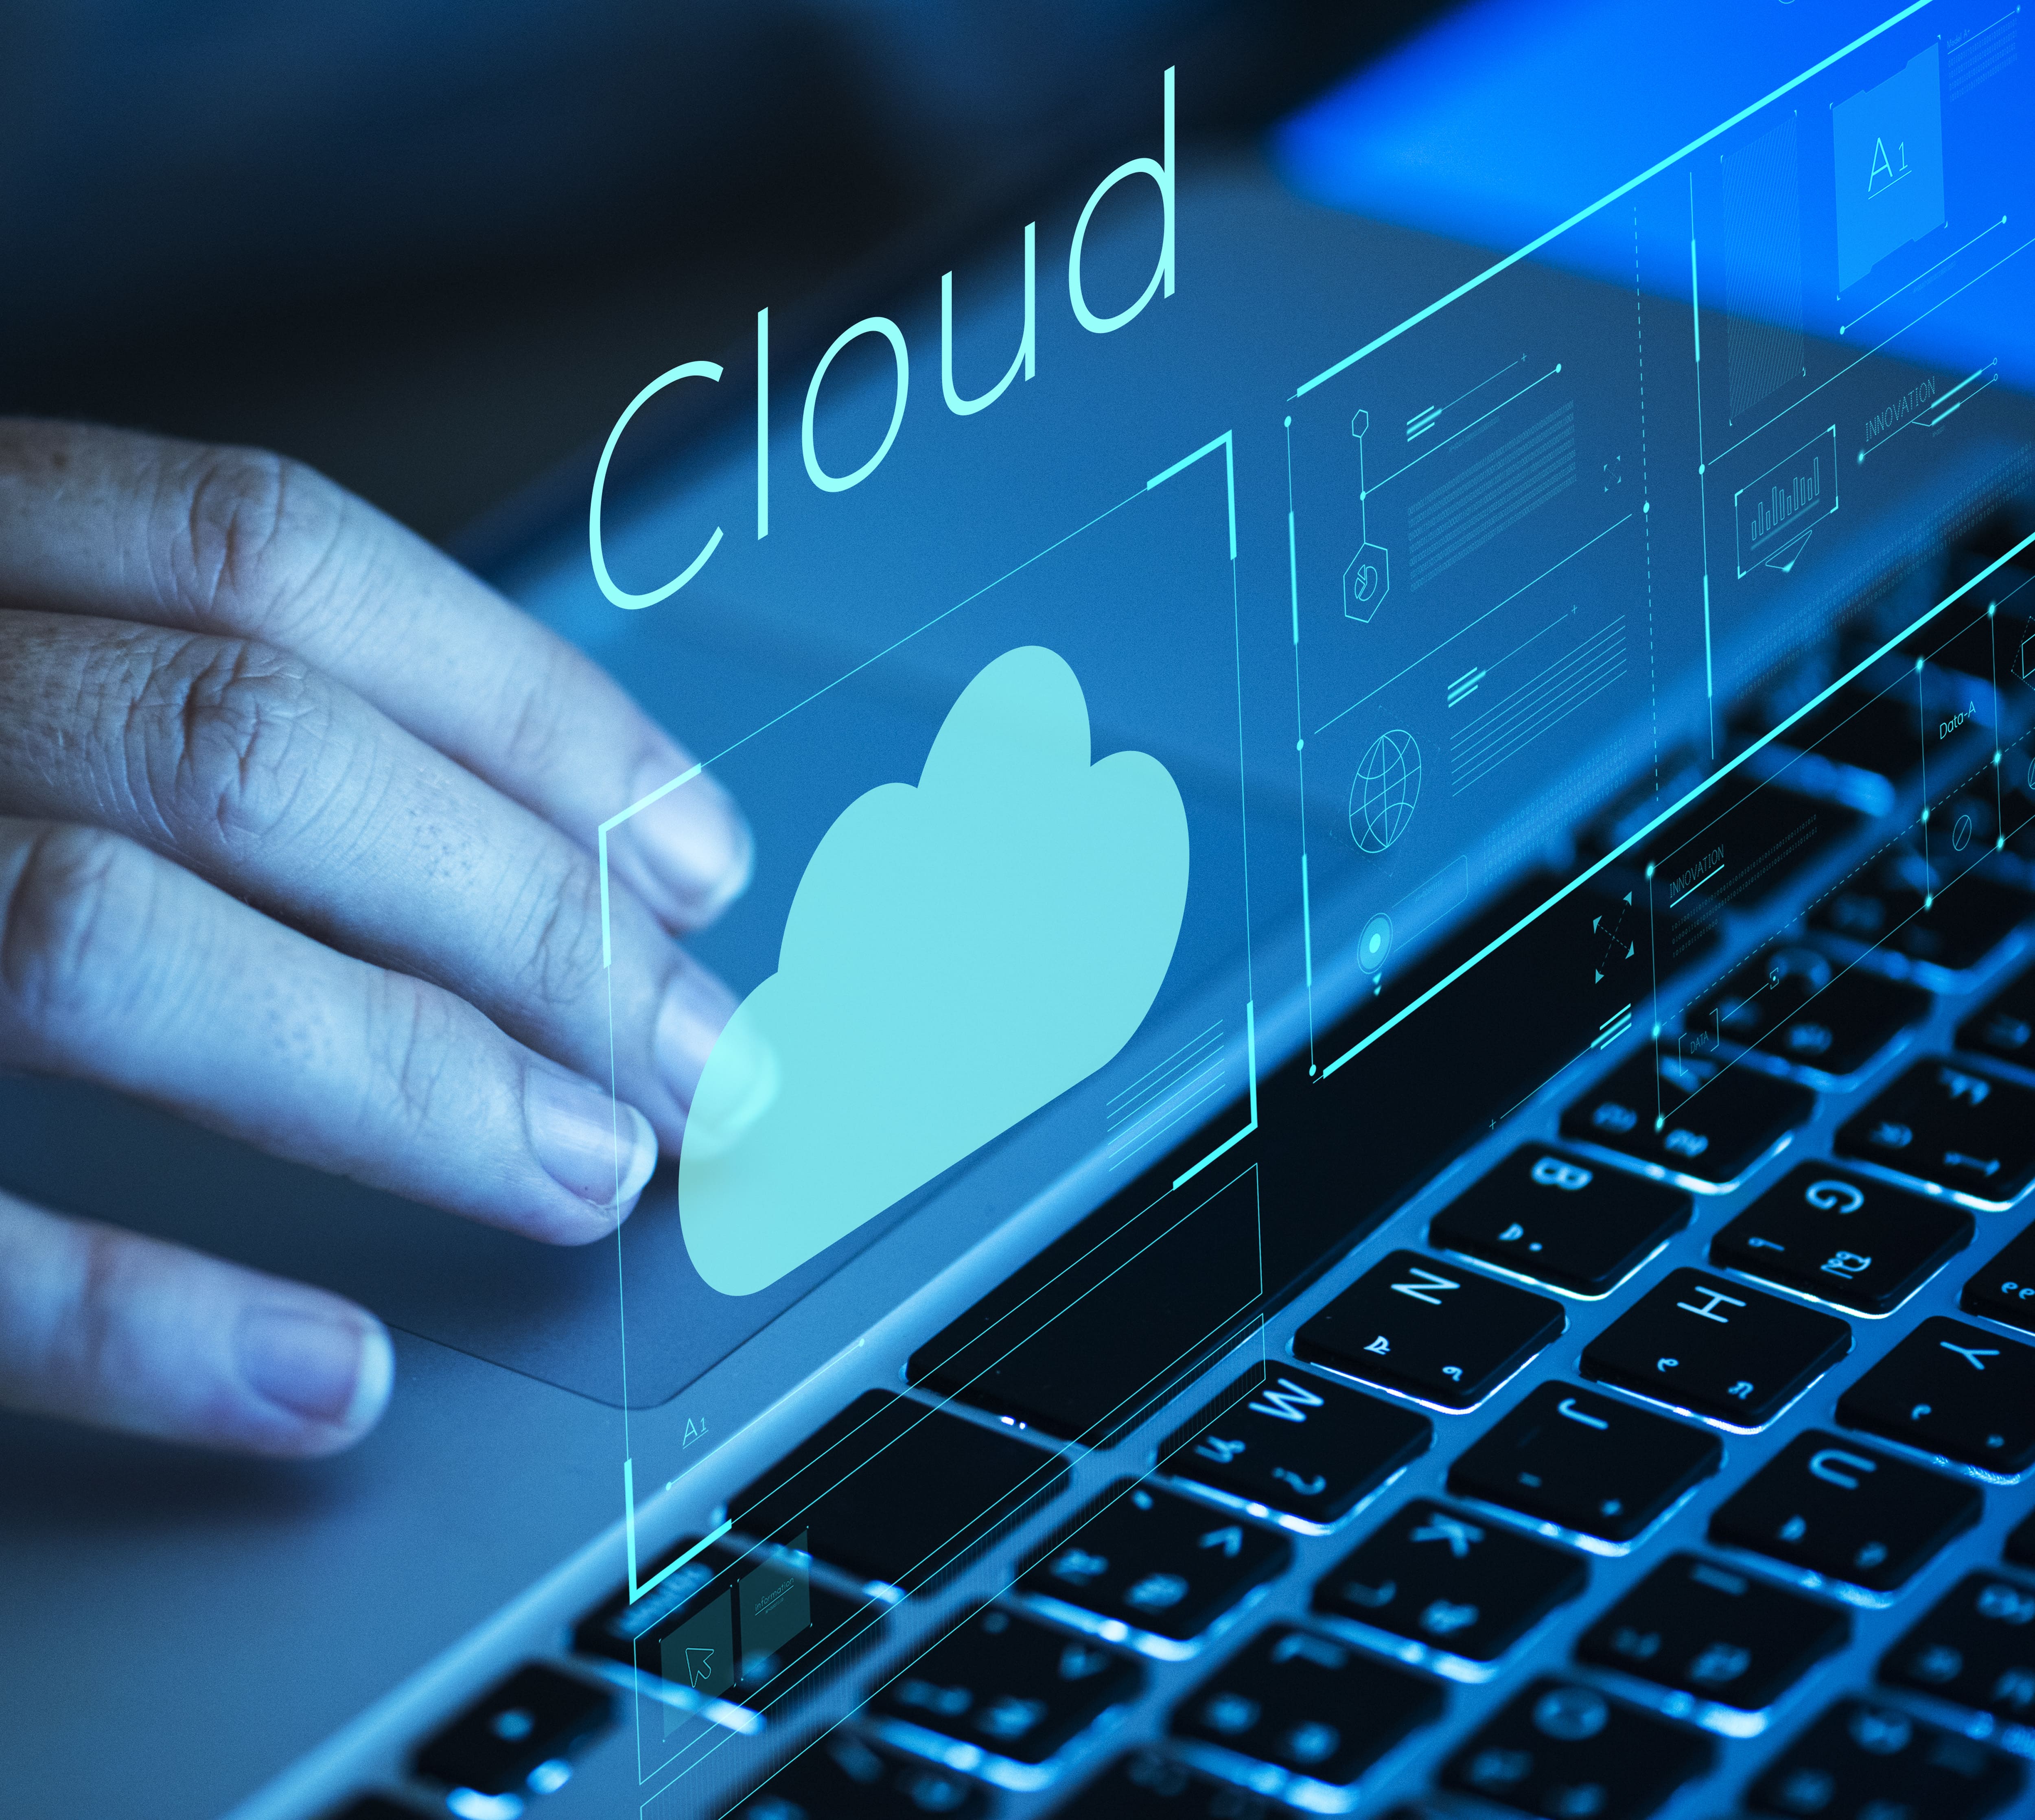 The use of the cloud as a primary tool puts companies’ data at risk